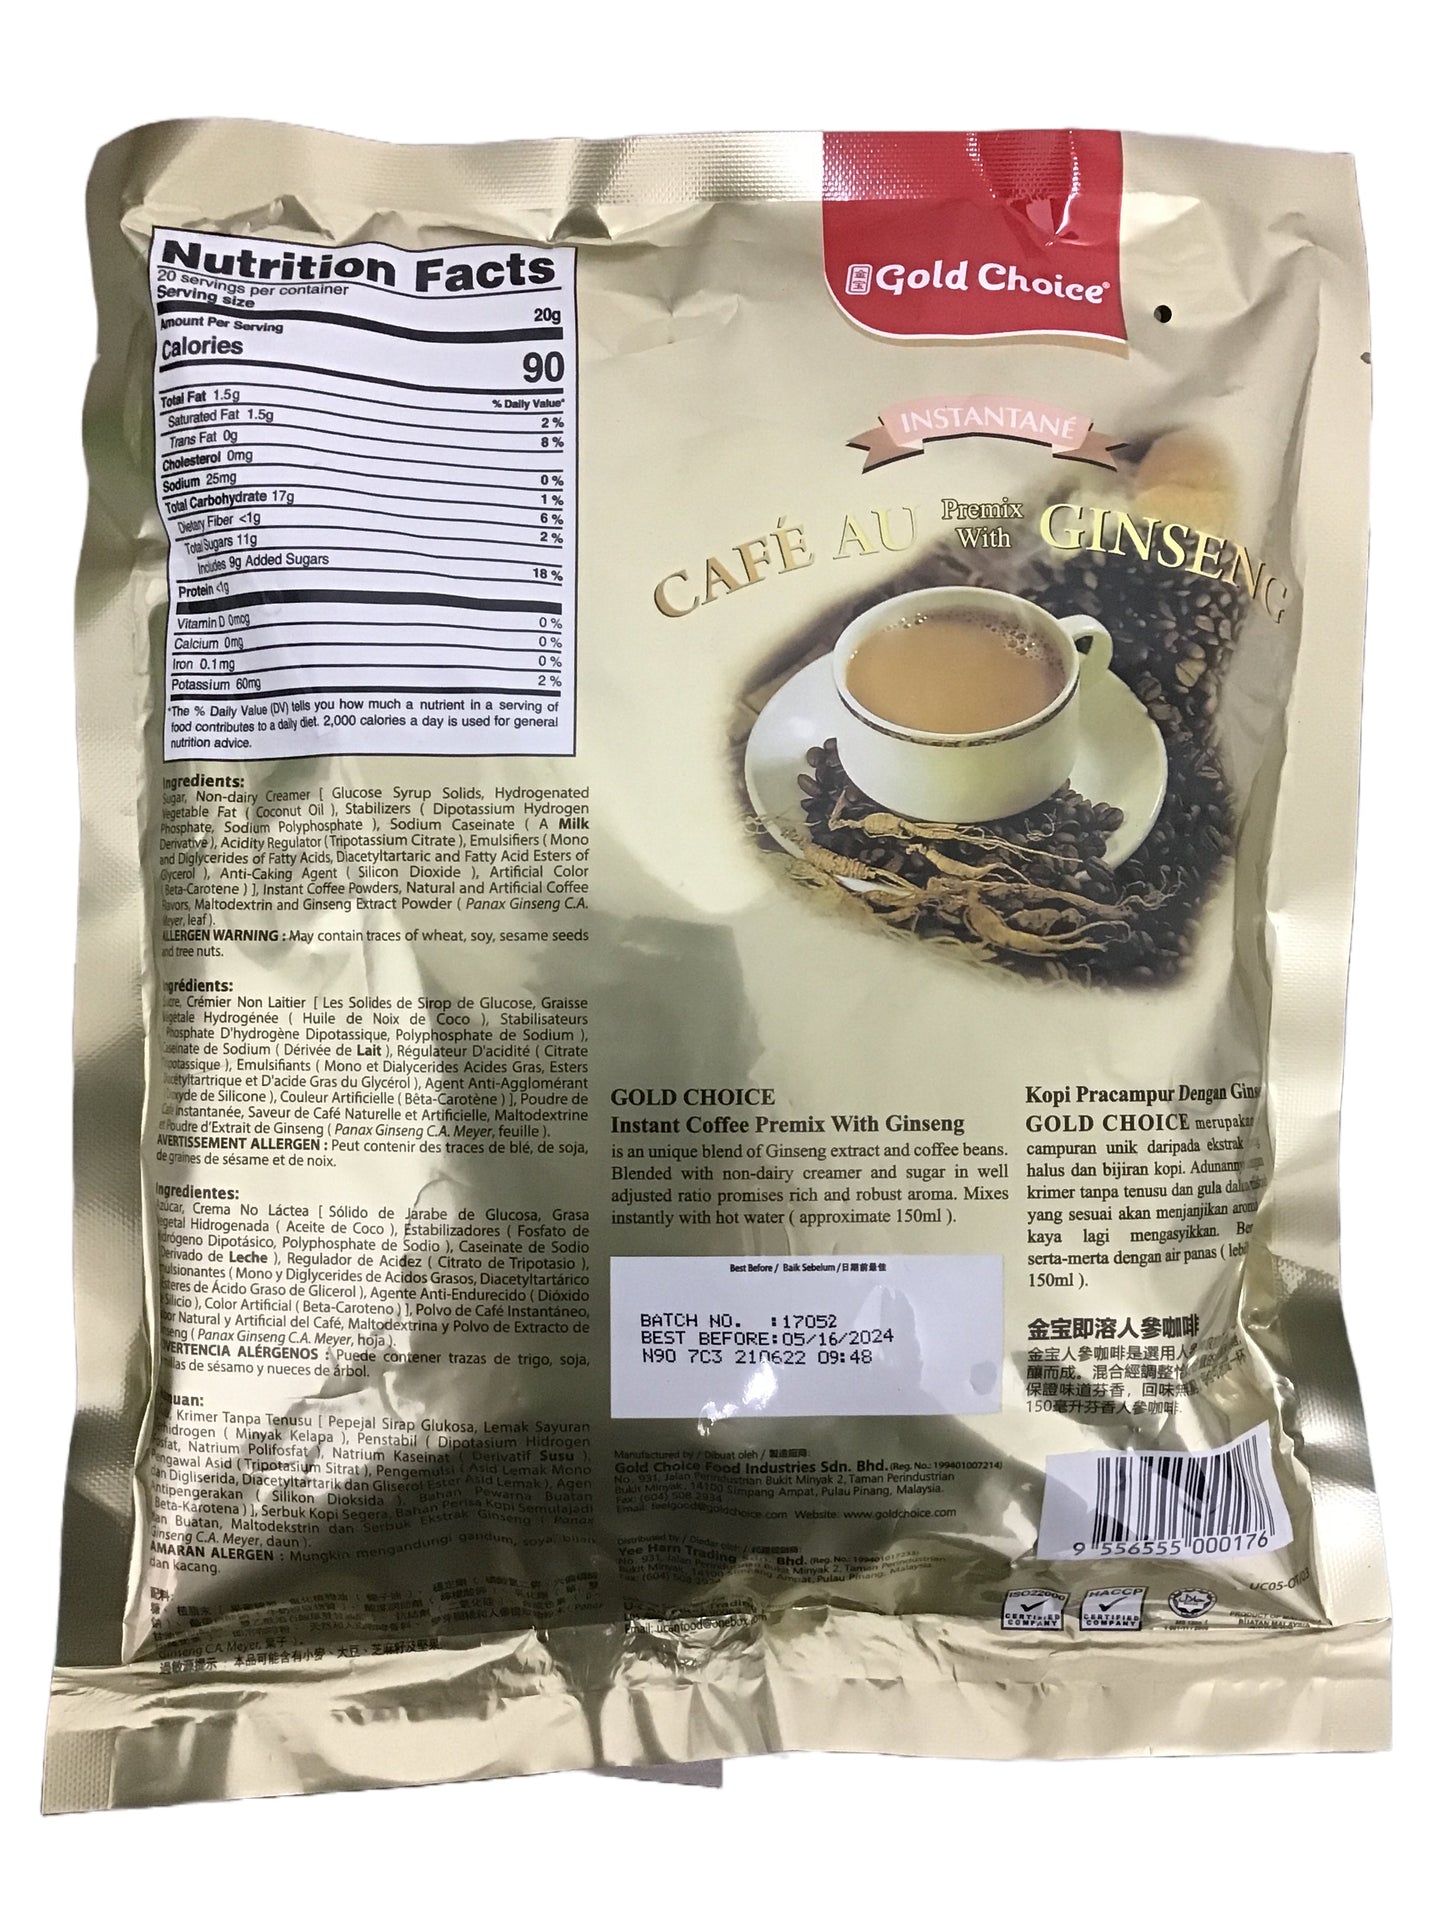 GOLD CHOICE Instant Coffee Premix With Ginseng 金宝即溶人参咖啡